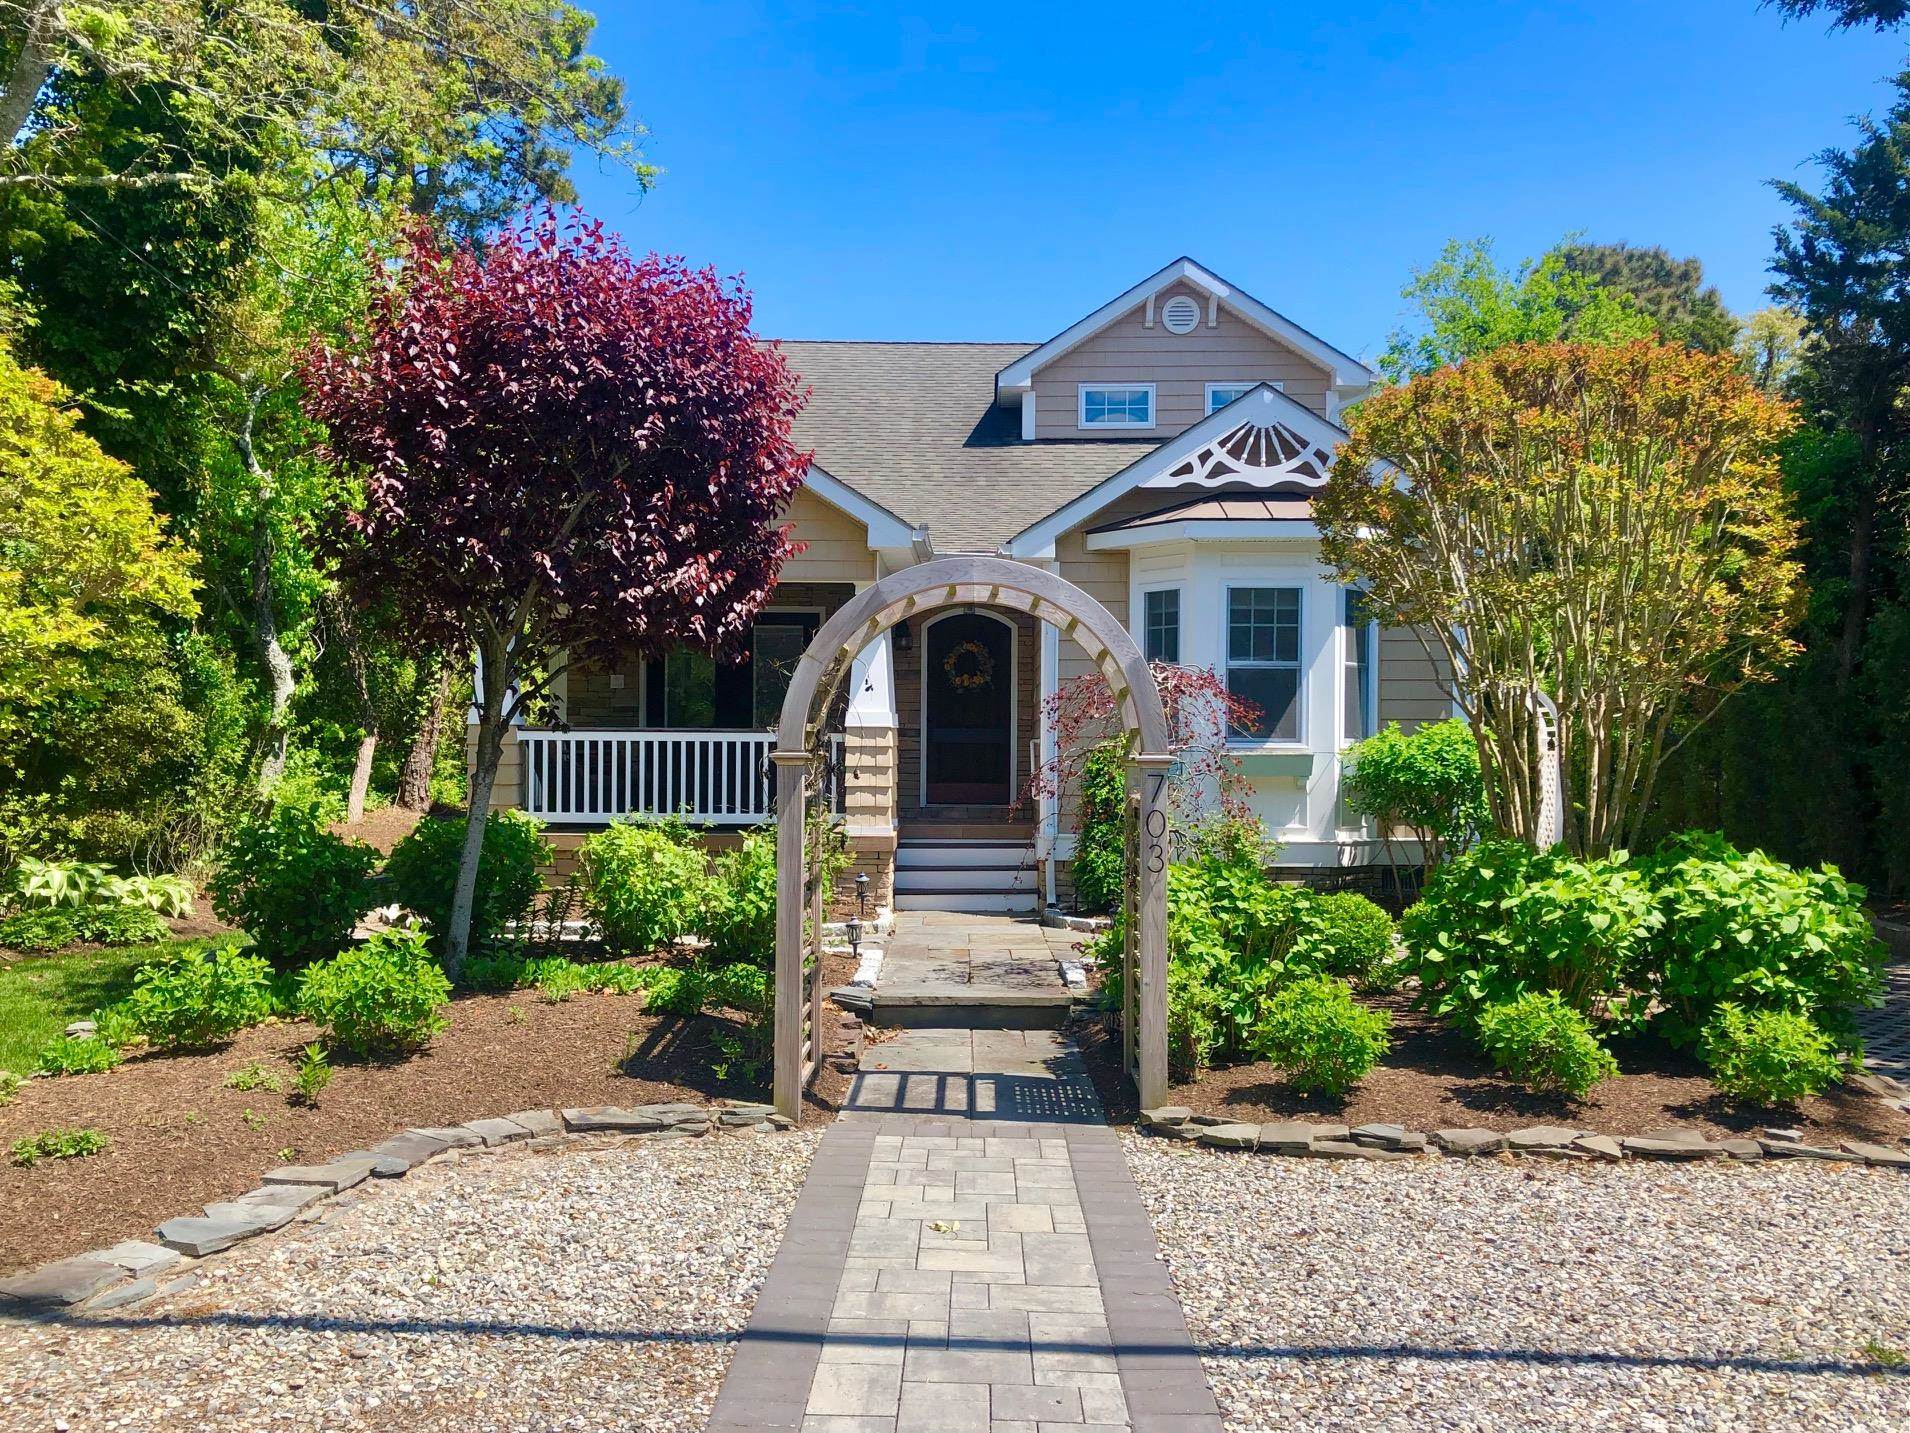 703 Cape Avenue, Cape May Point